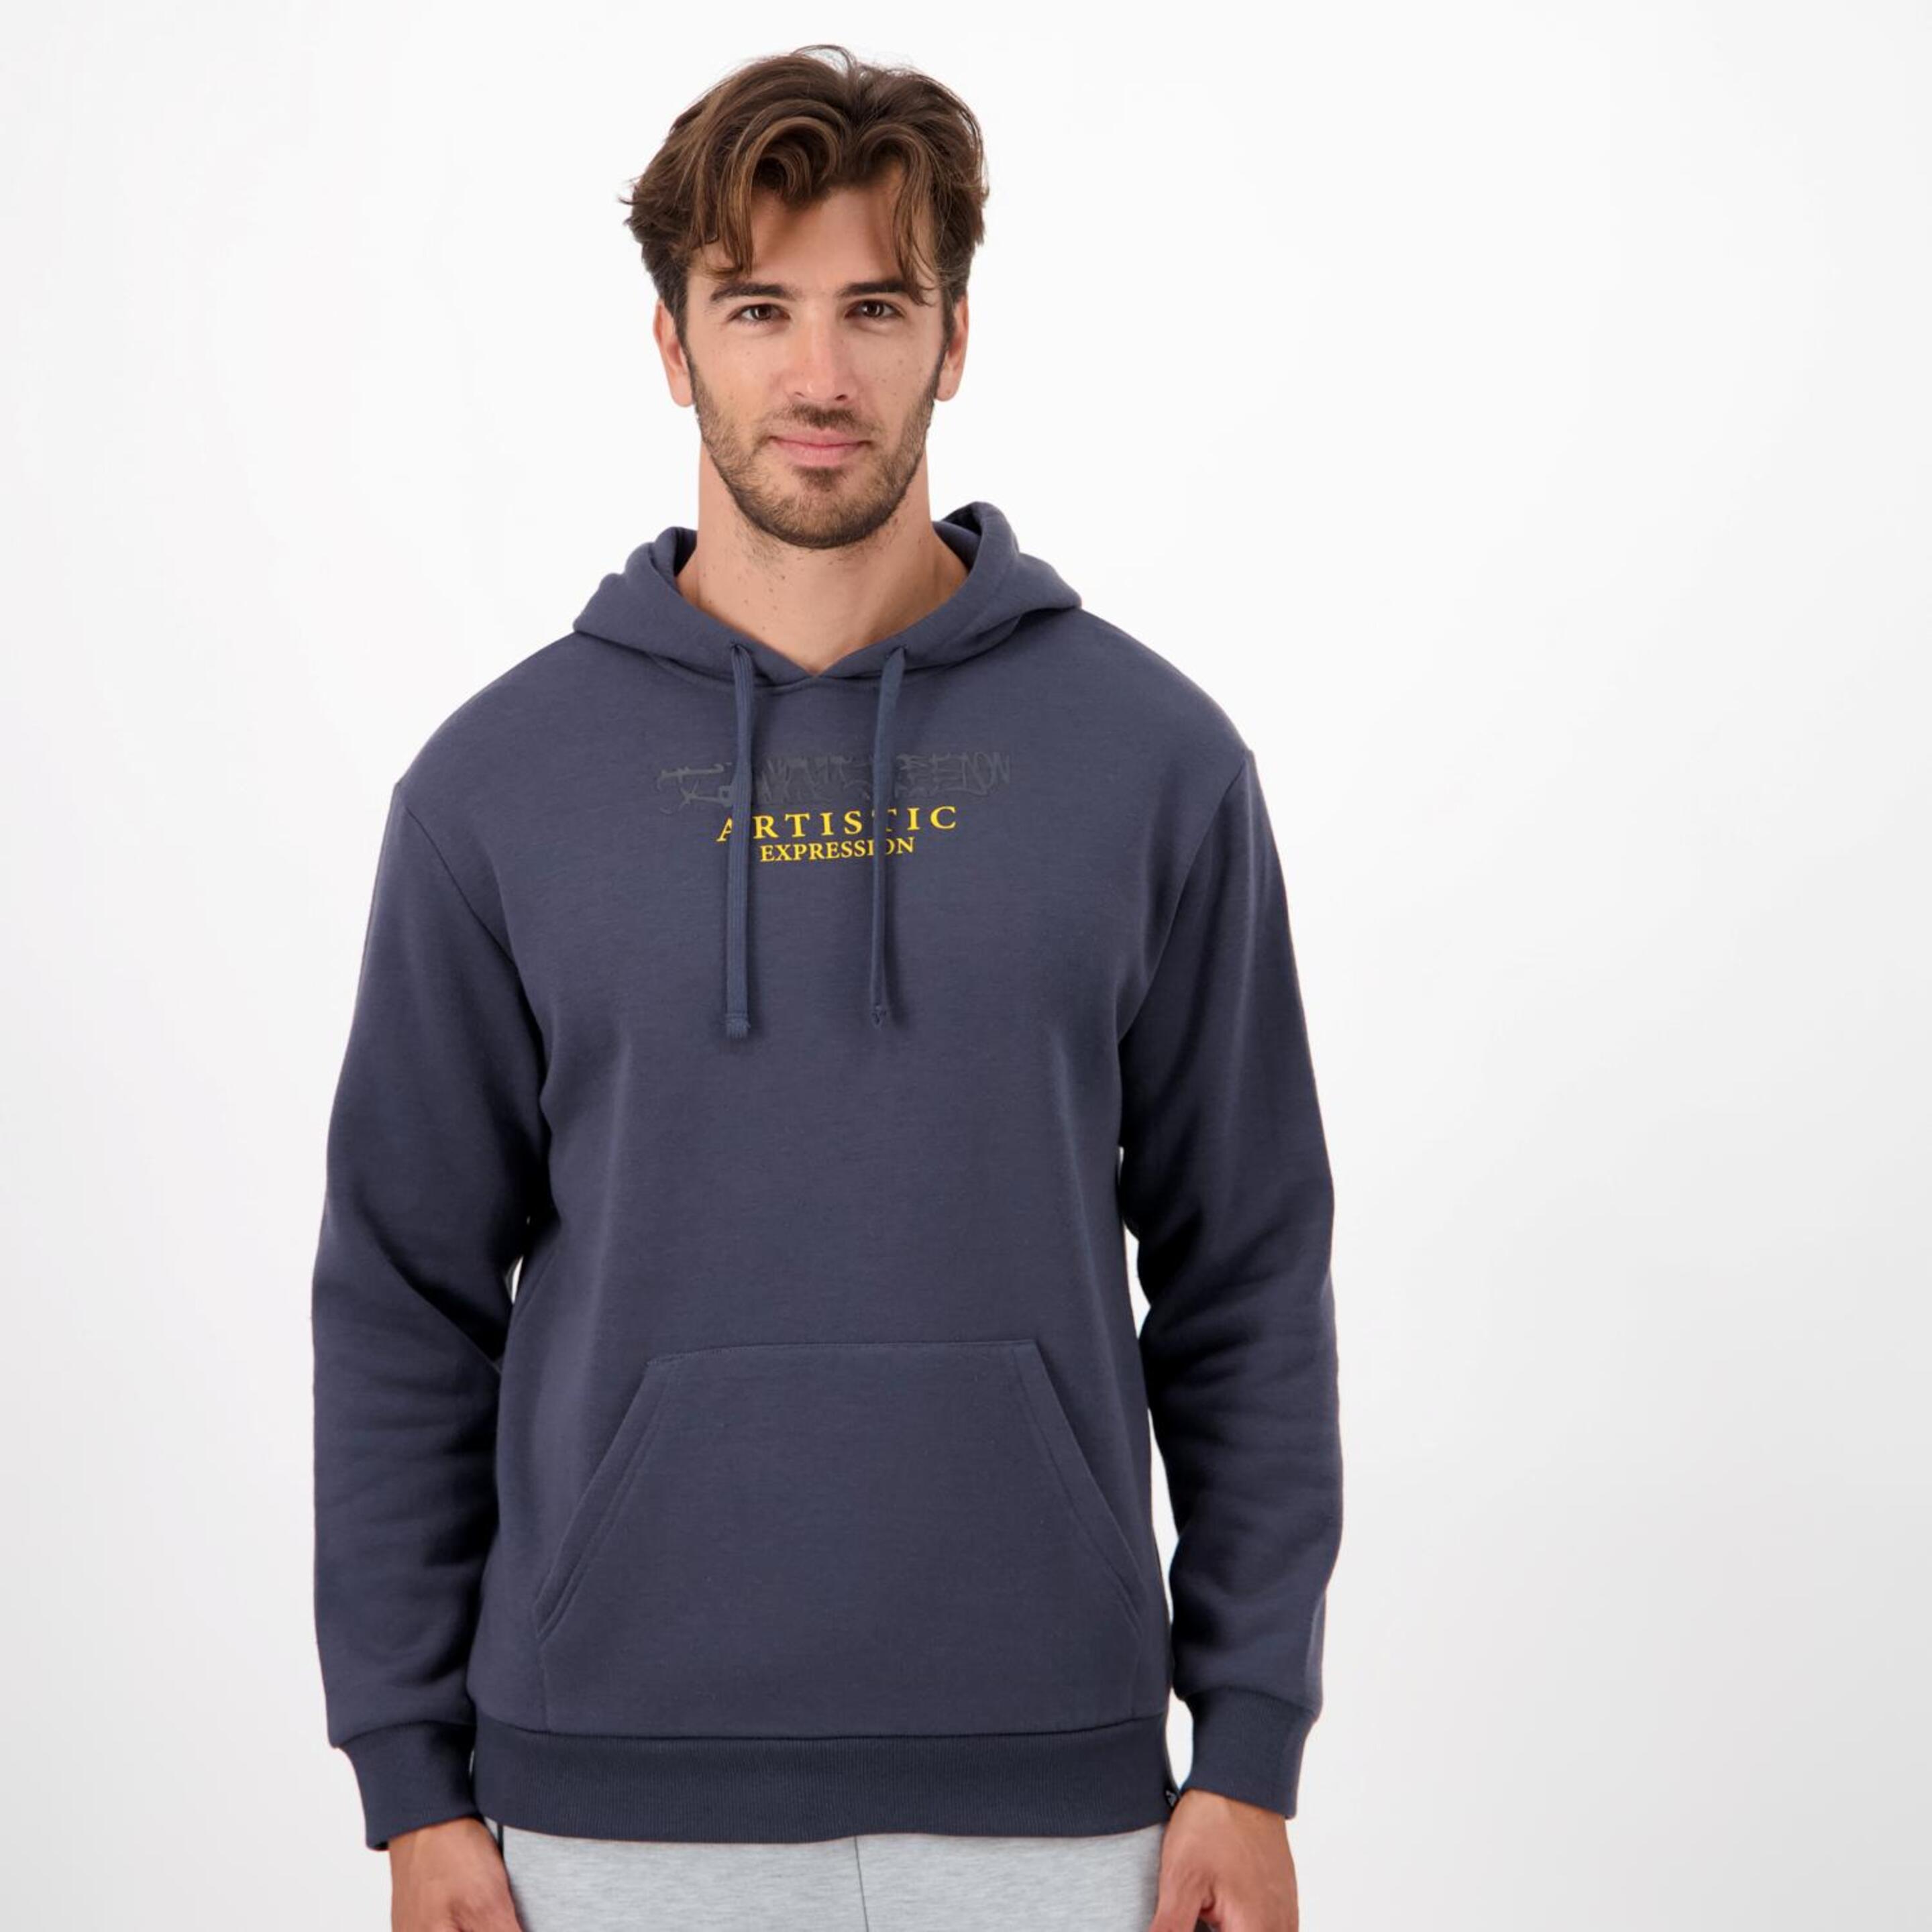 Up Stamps - gris - Sudadera Capucha Hombre